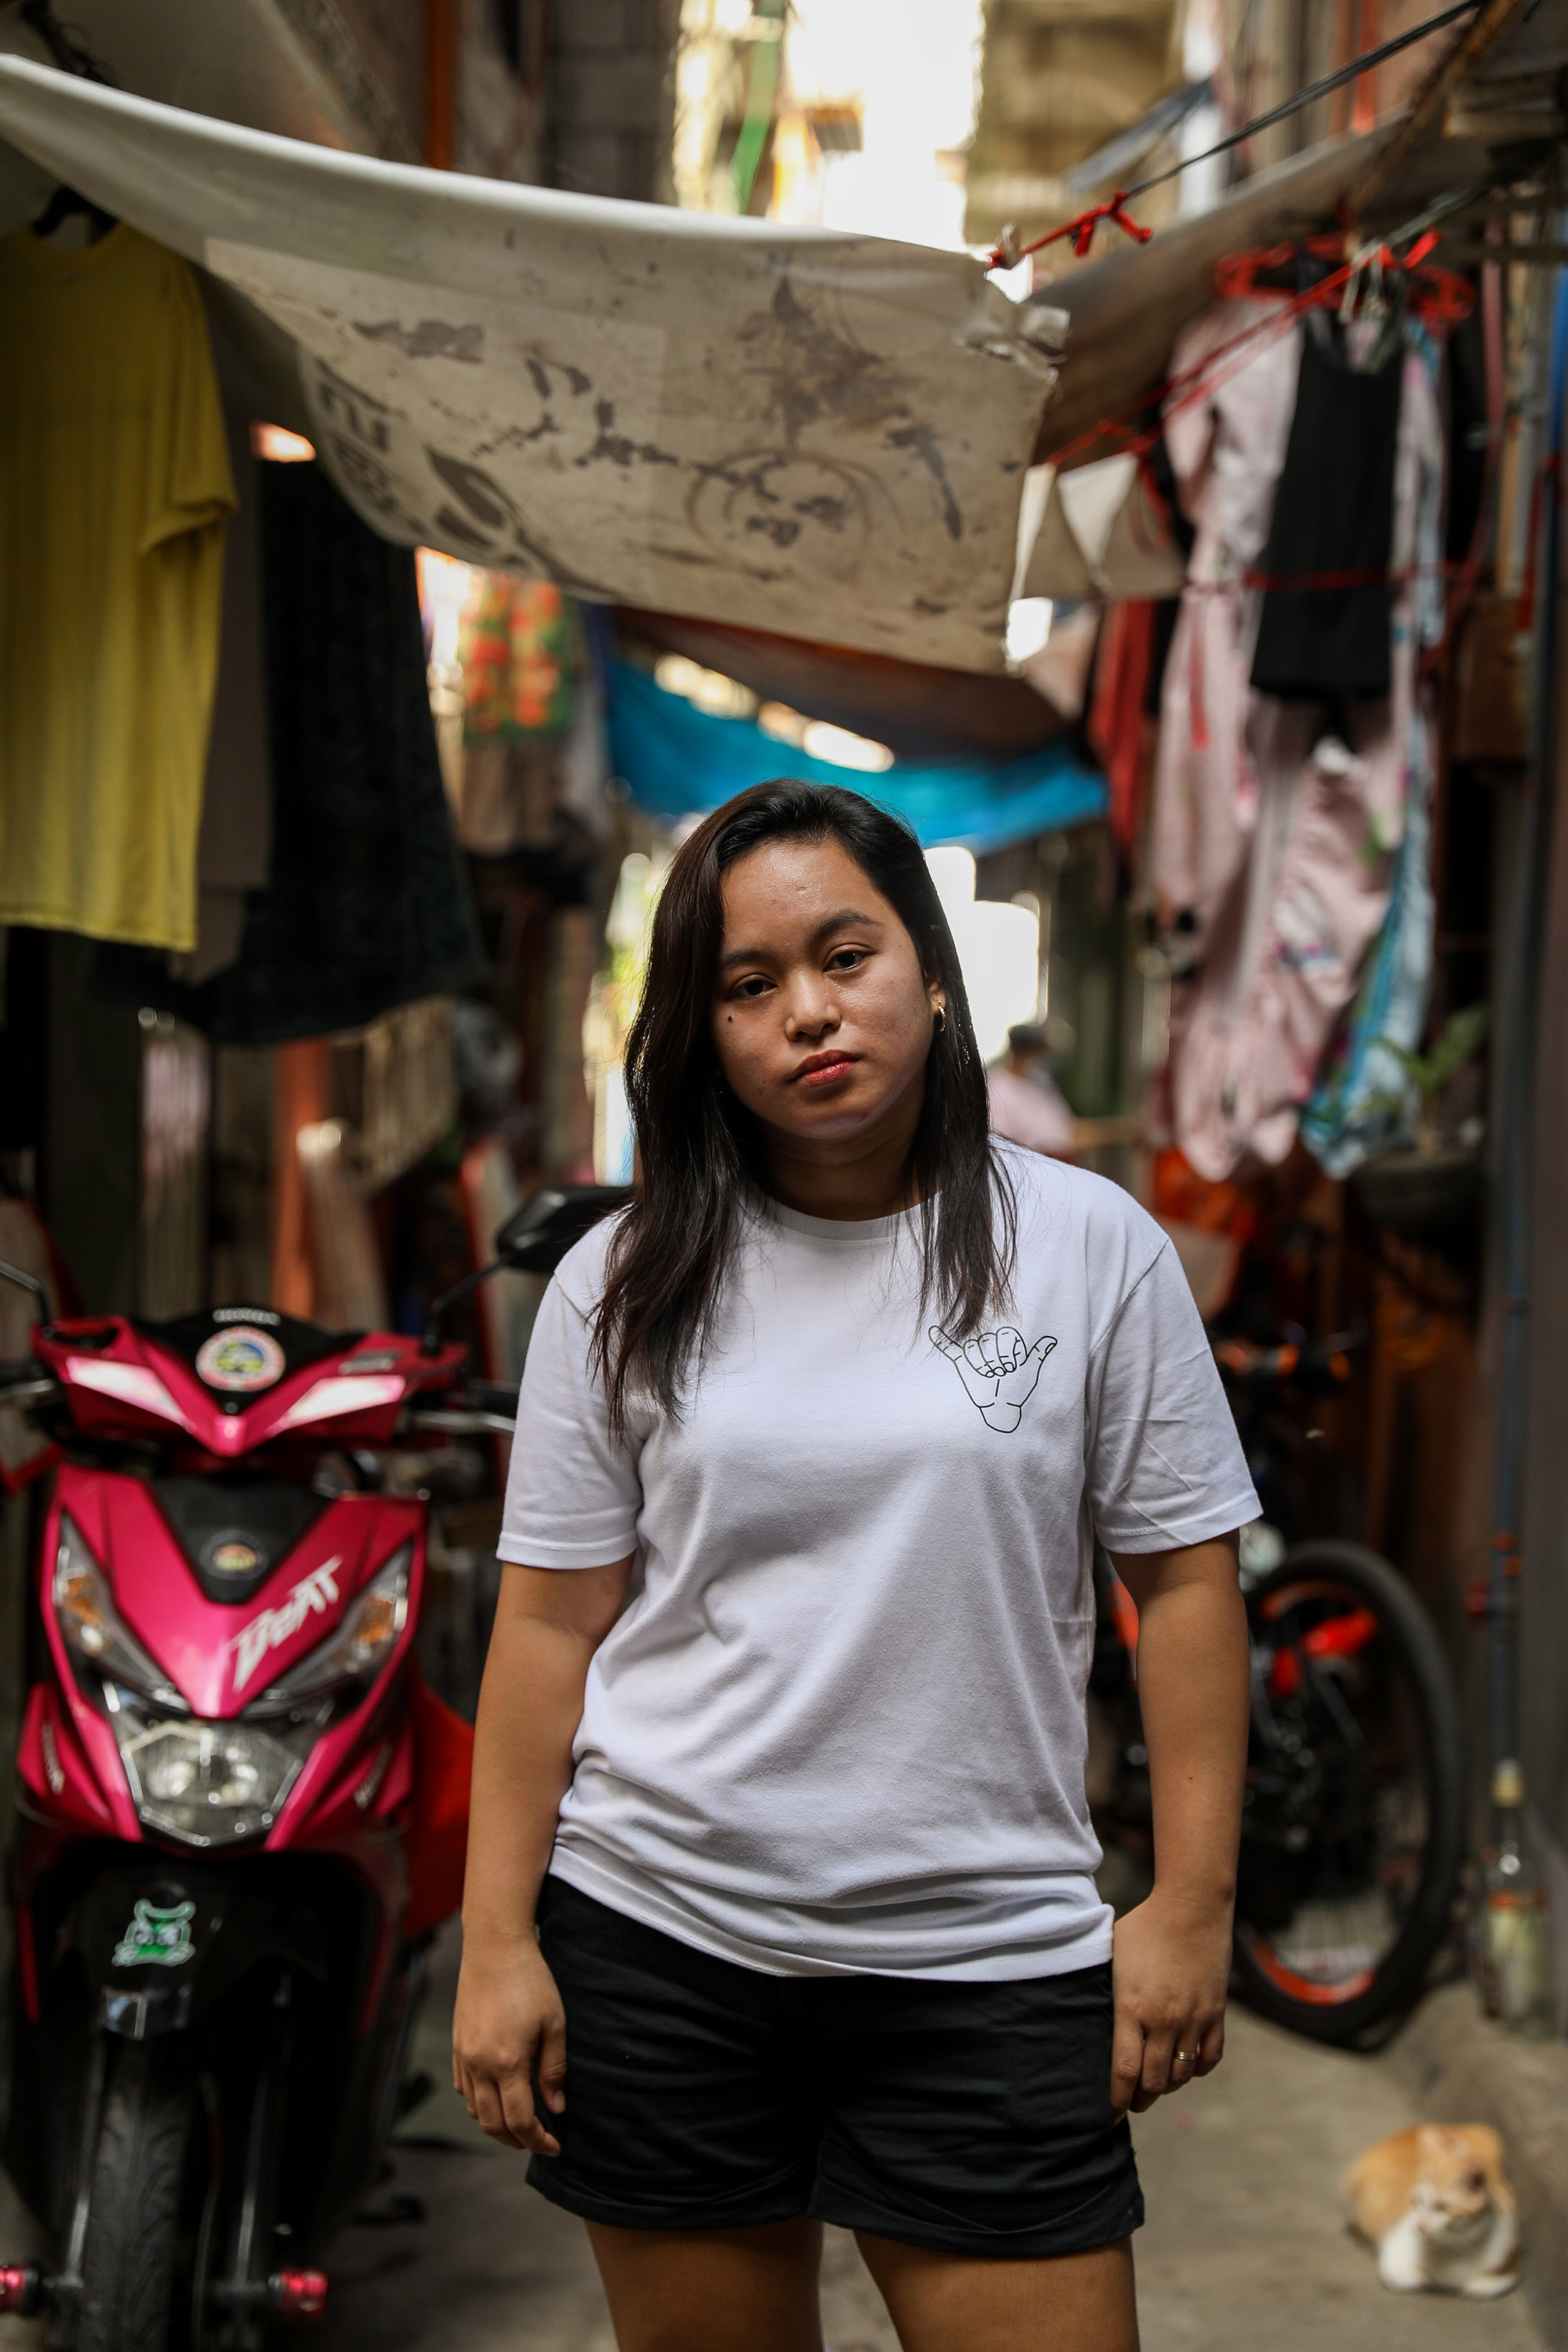 Joan Humawid, 31, is currently a house wife and struggling to look for a decent job to provide for her family. The number of COVID-19 cases in the Philippines has reached more than 550,000, while the country’s unemployment rate increased during the pandemic as millions have lost their jobs due to economic effects and closure of businesses amidst coronavirus restrictions.